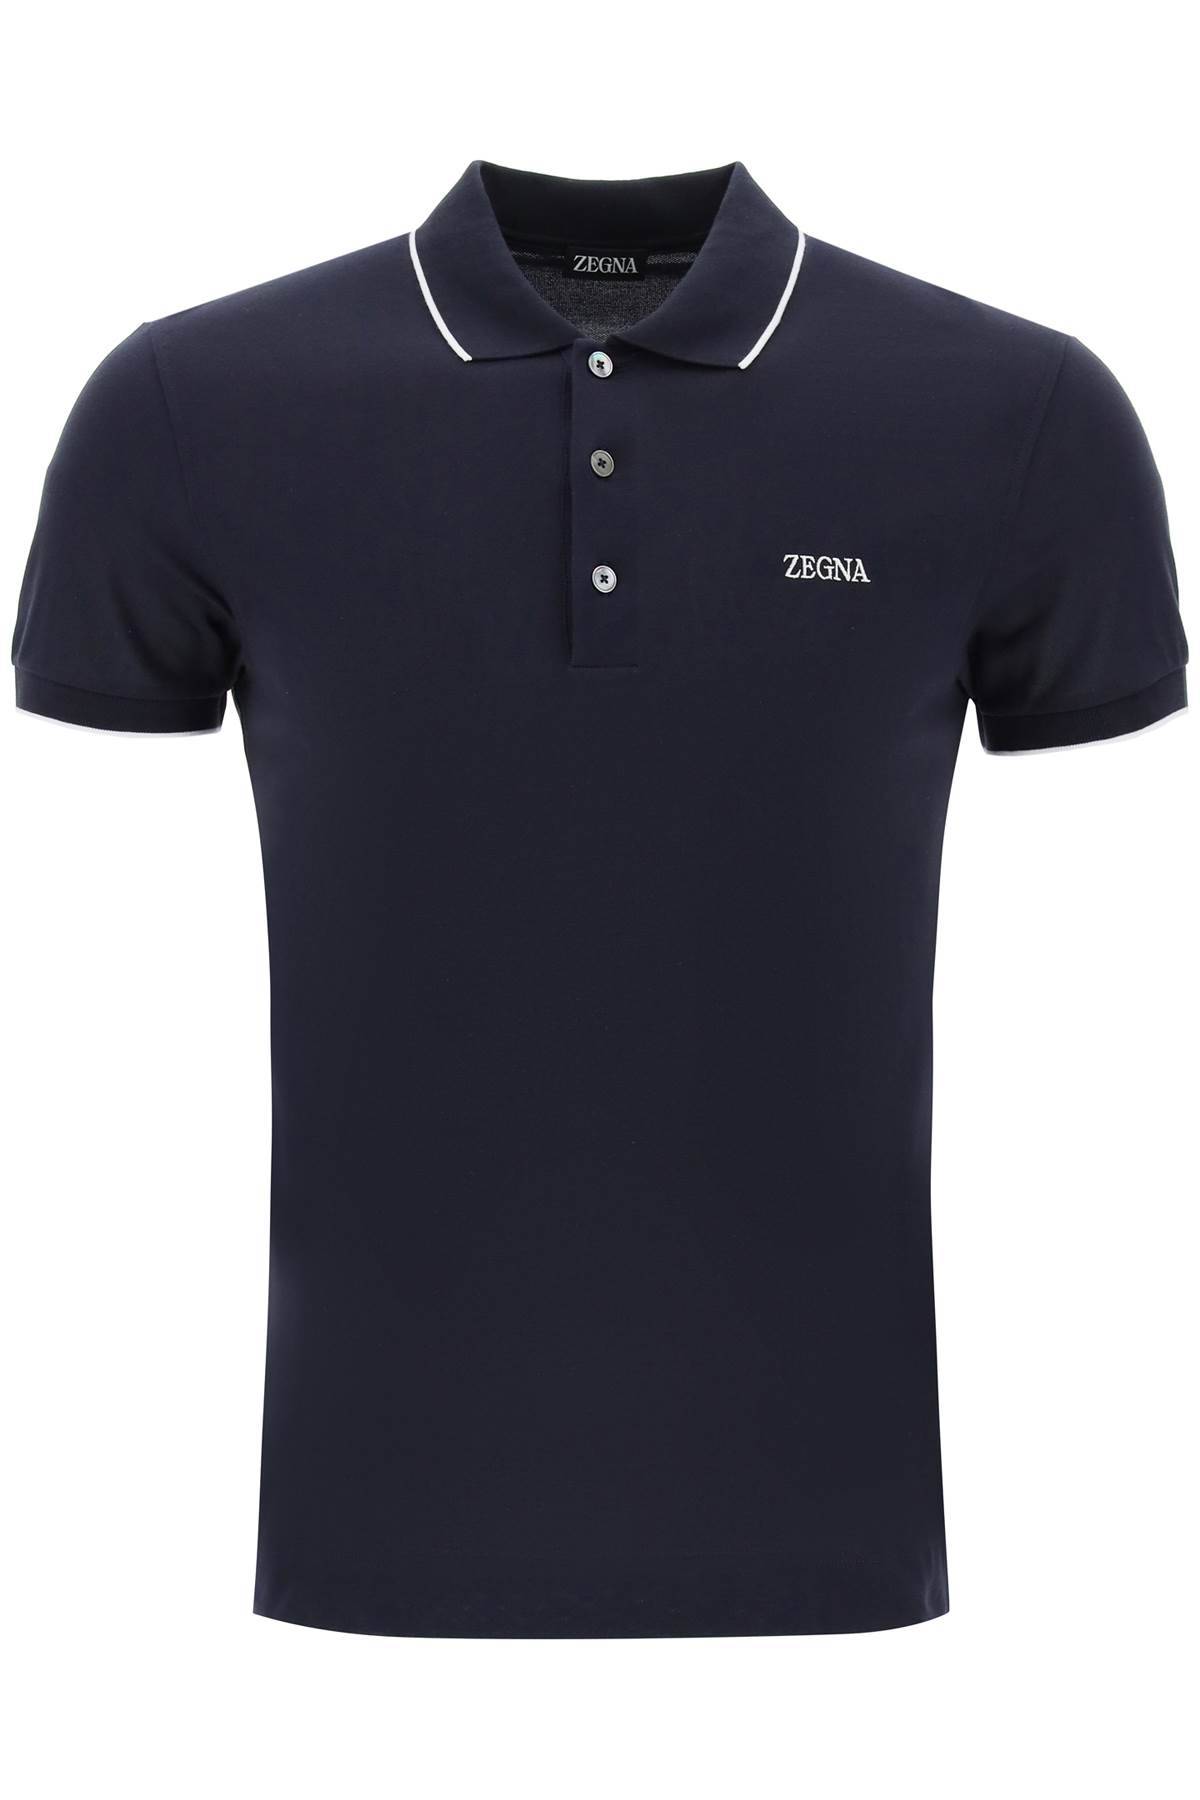 zegna ZEGNA slim fit polo shirt in stretch cotton